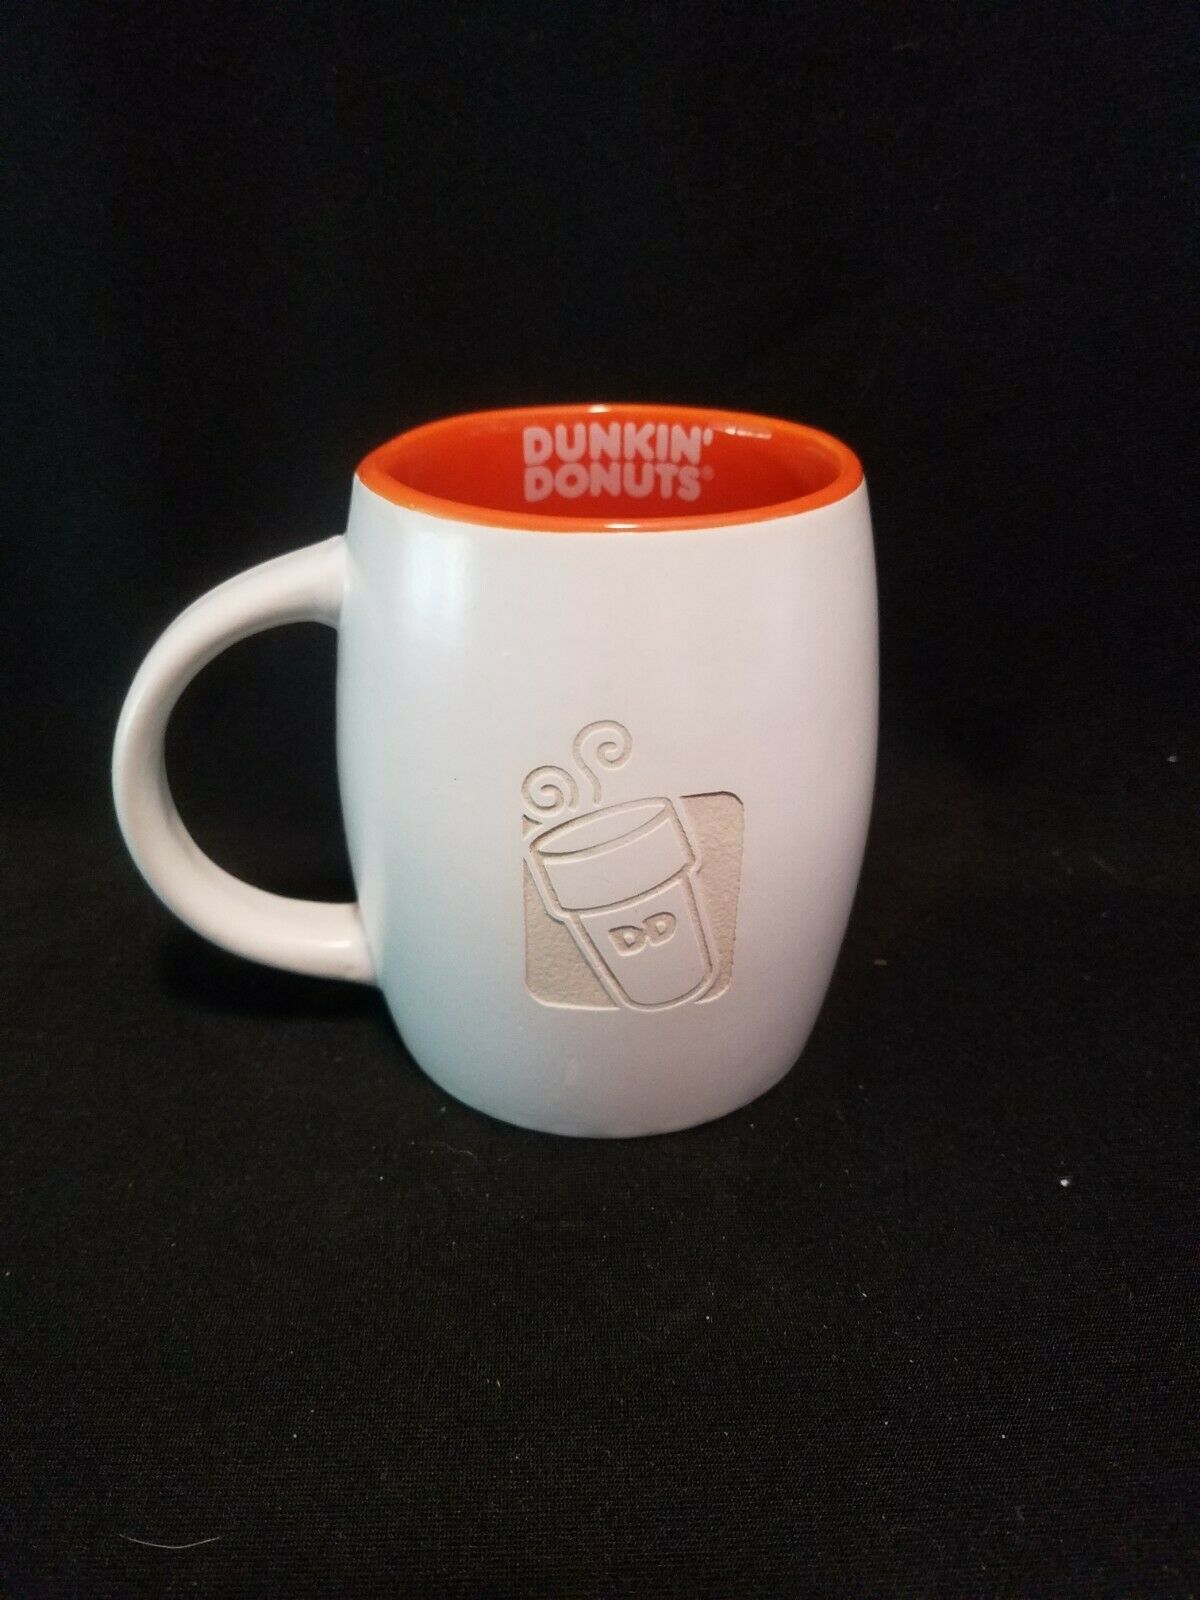 Primary image for 2012 Dunkin' Donuts Coffee Mug Tea Cup White w/Orange w/White Lettering 14 oz